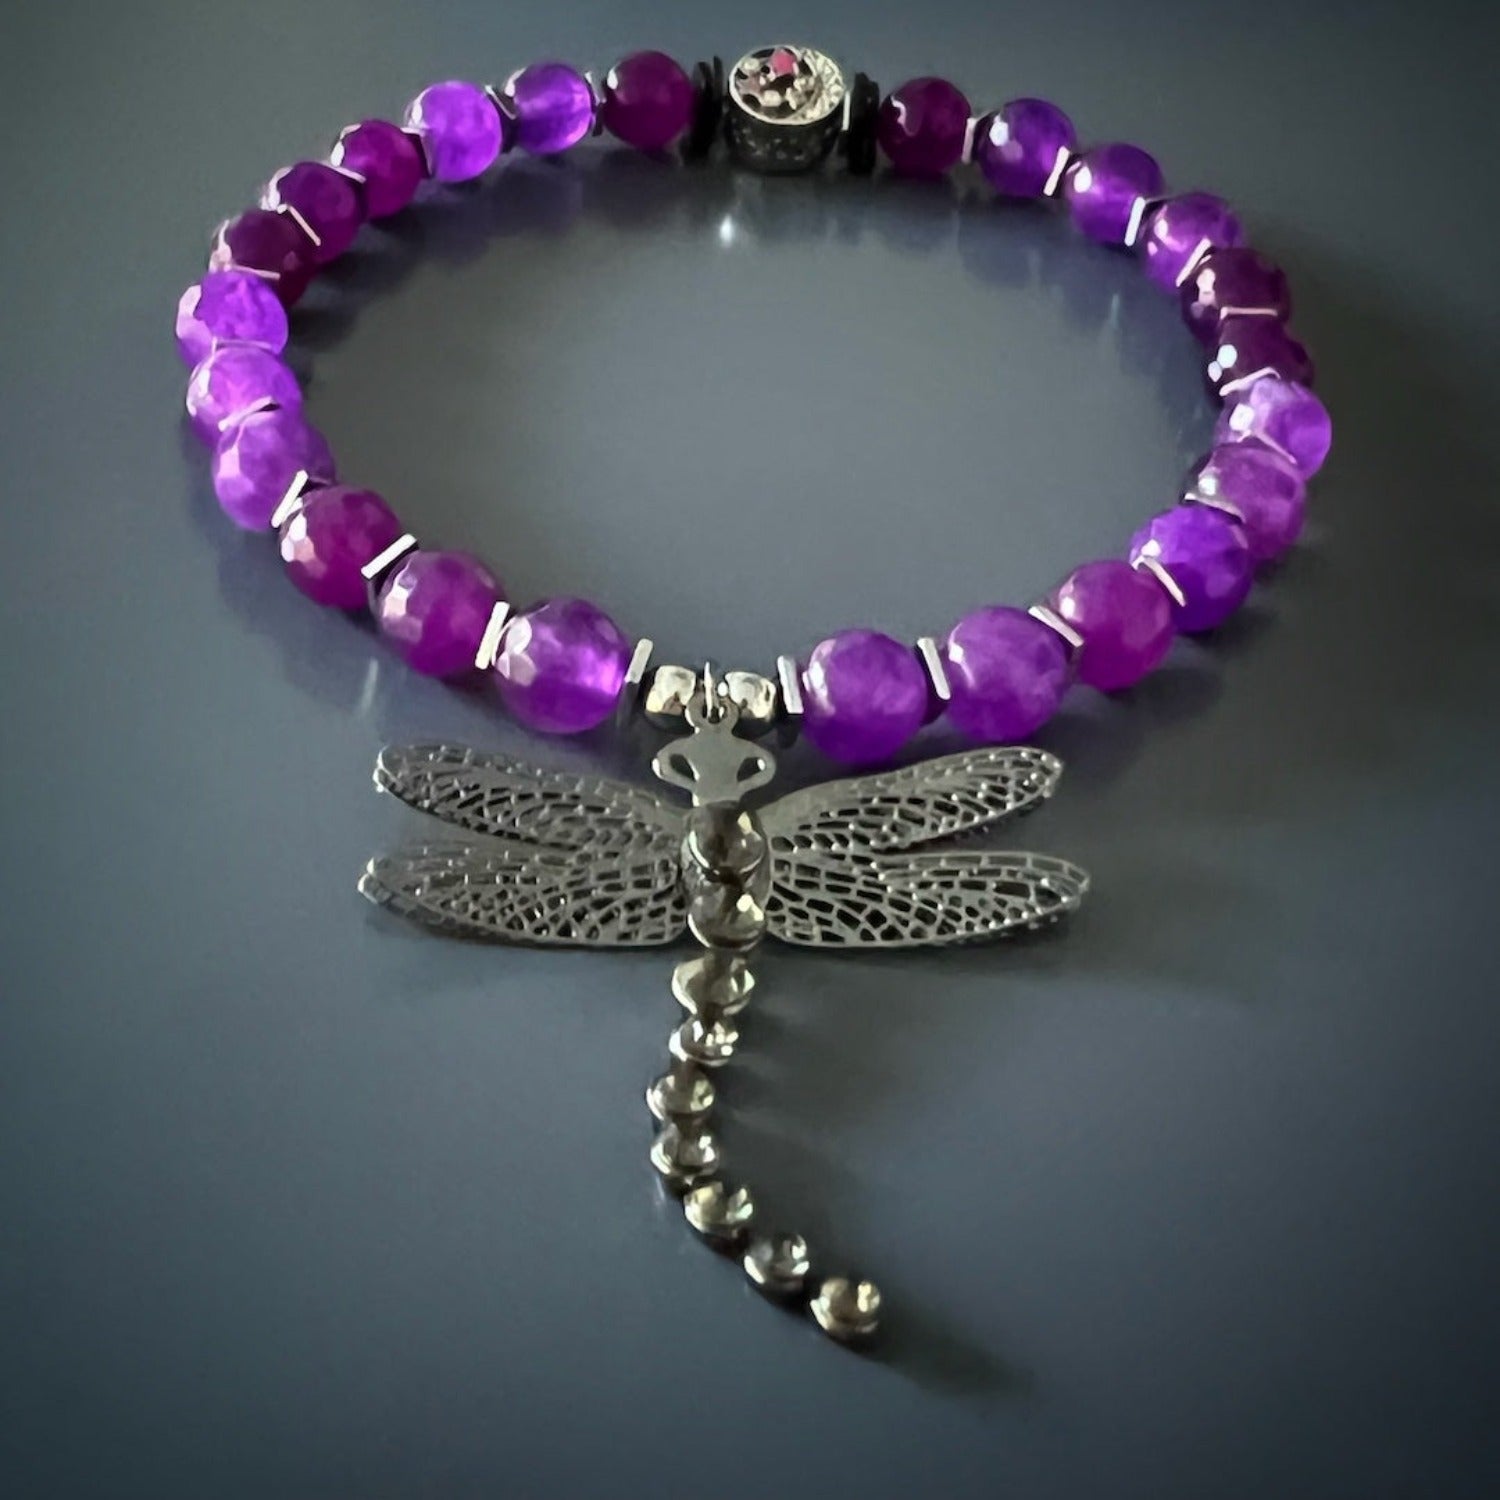 Unique Dragonfly Ankle Bracelet with silver accents and a powerful dragonfly charm.